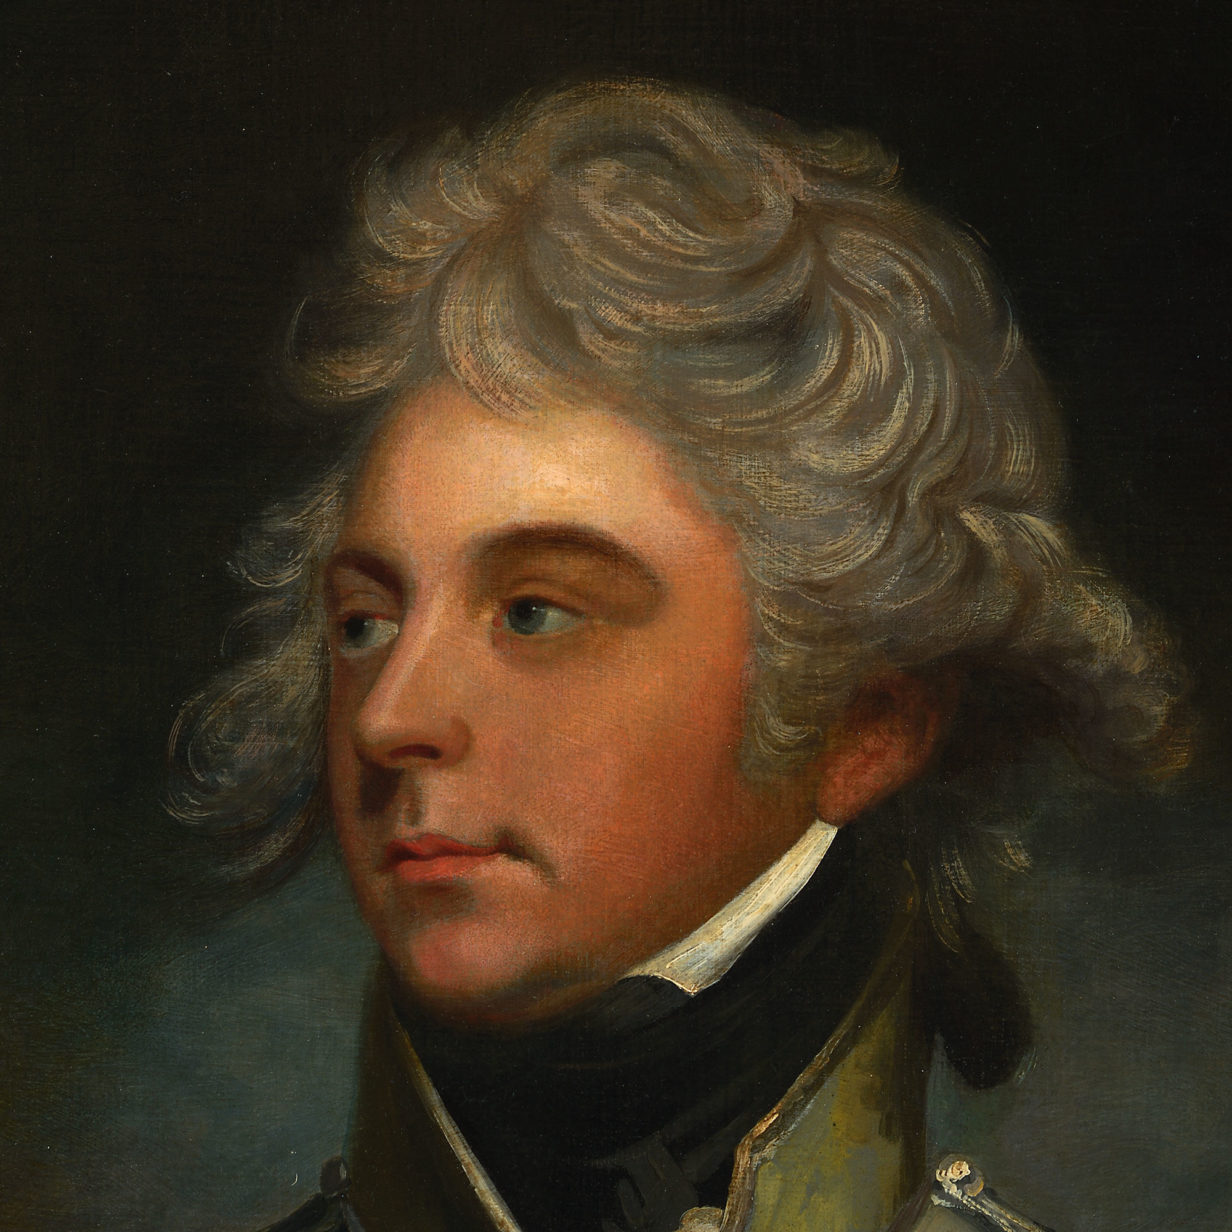 Early 19th century portrait of king george iv as prince of wales, after sir william beechey